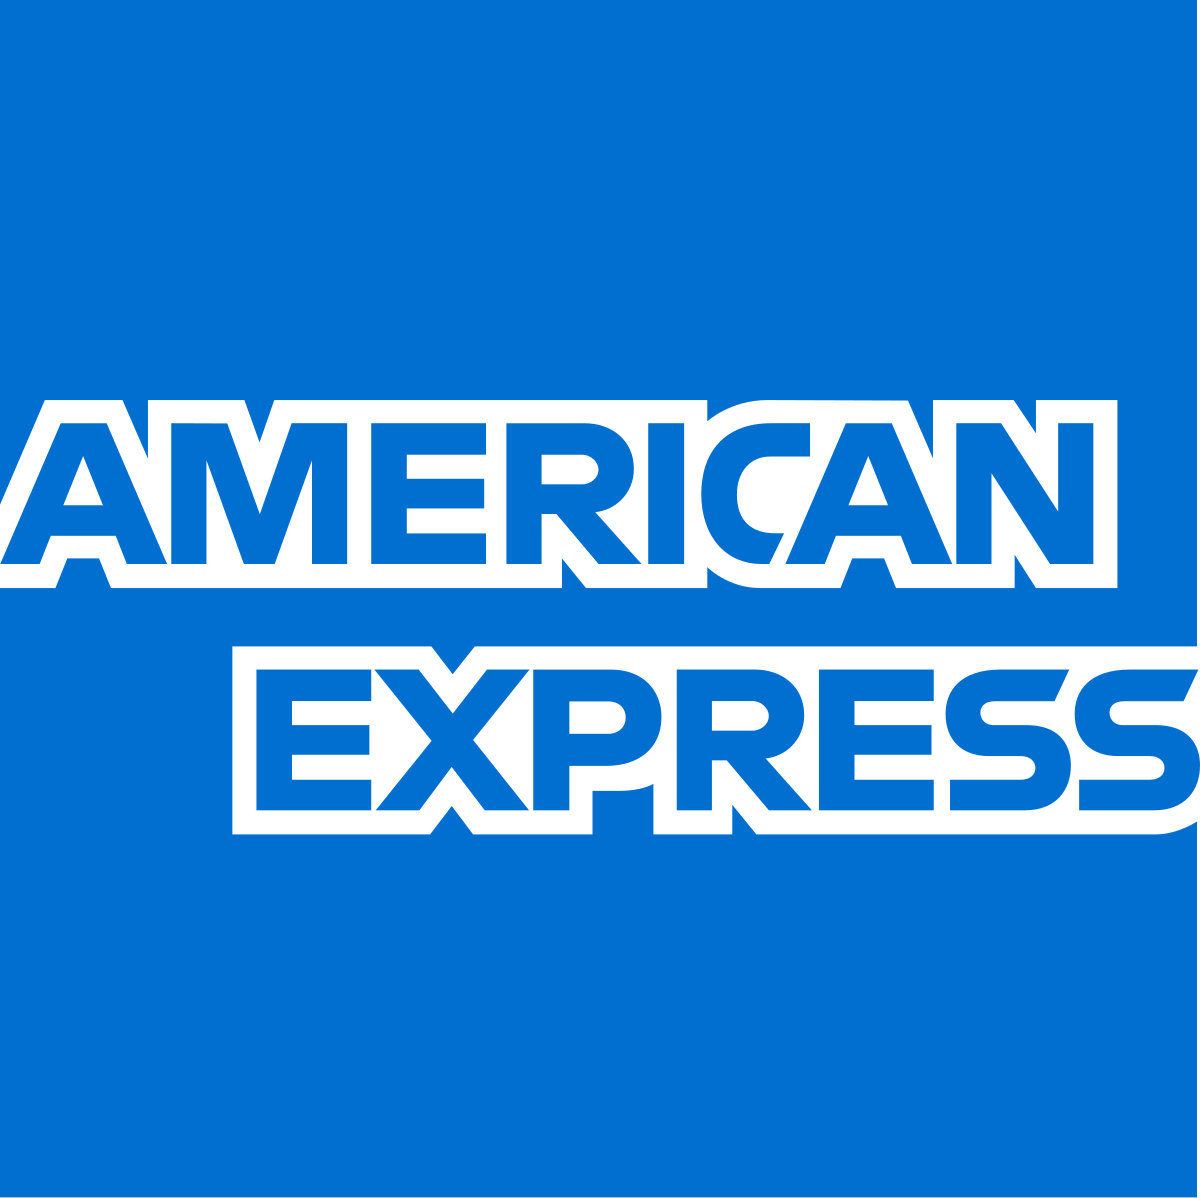 Parrainage American Express